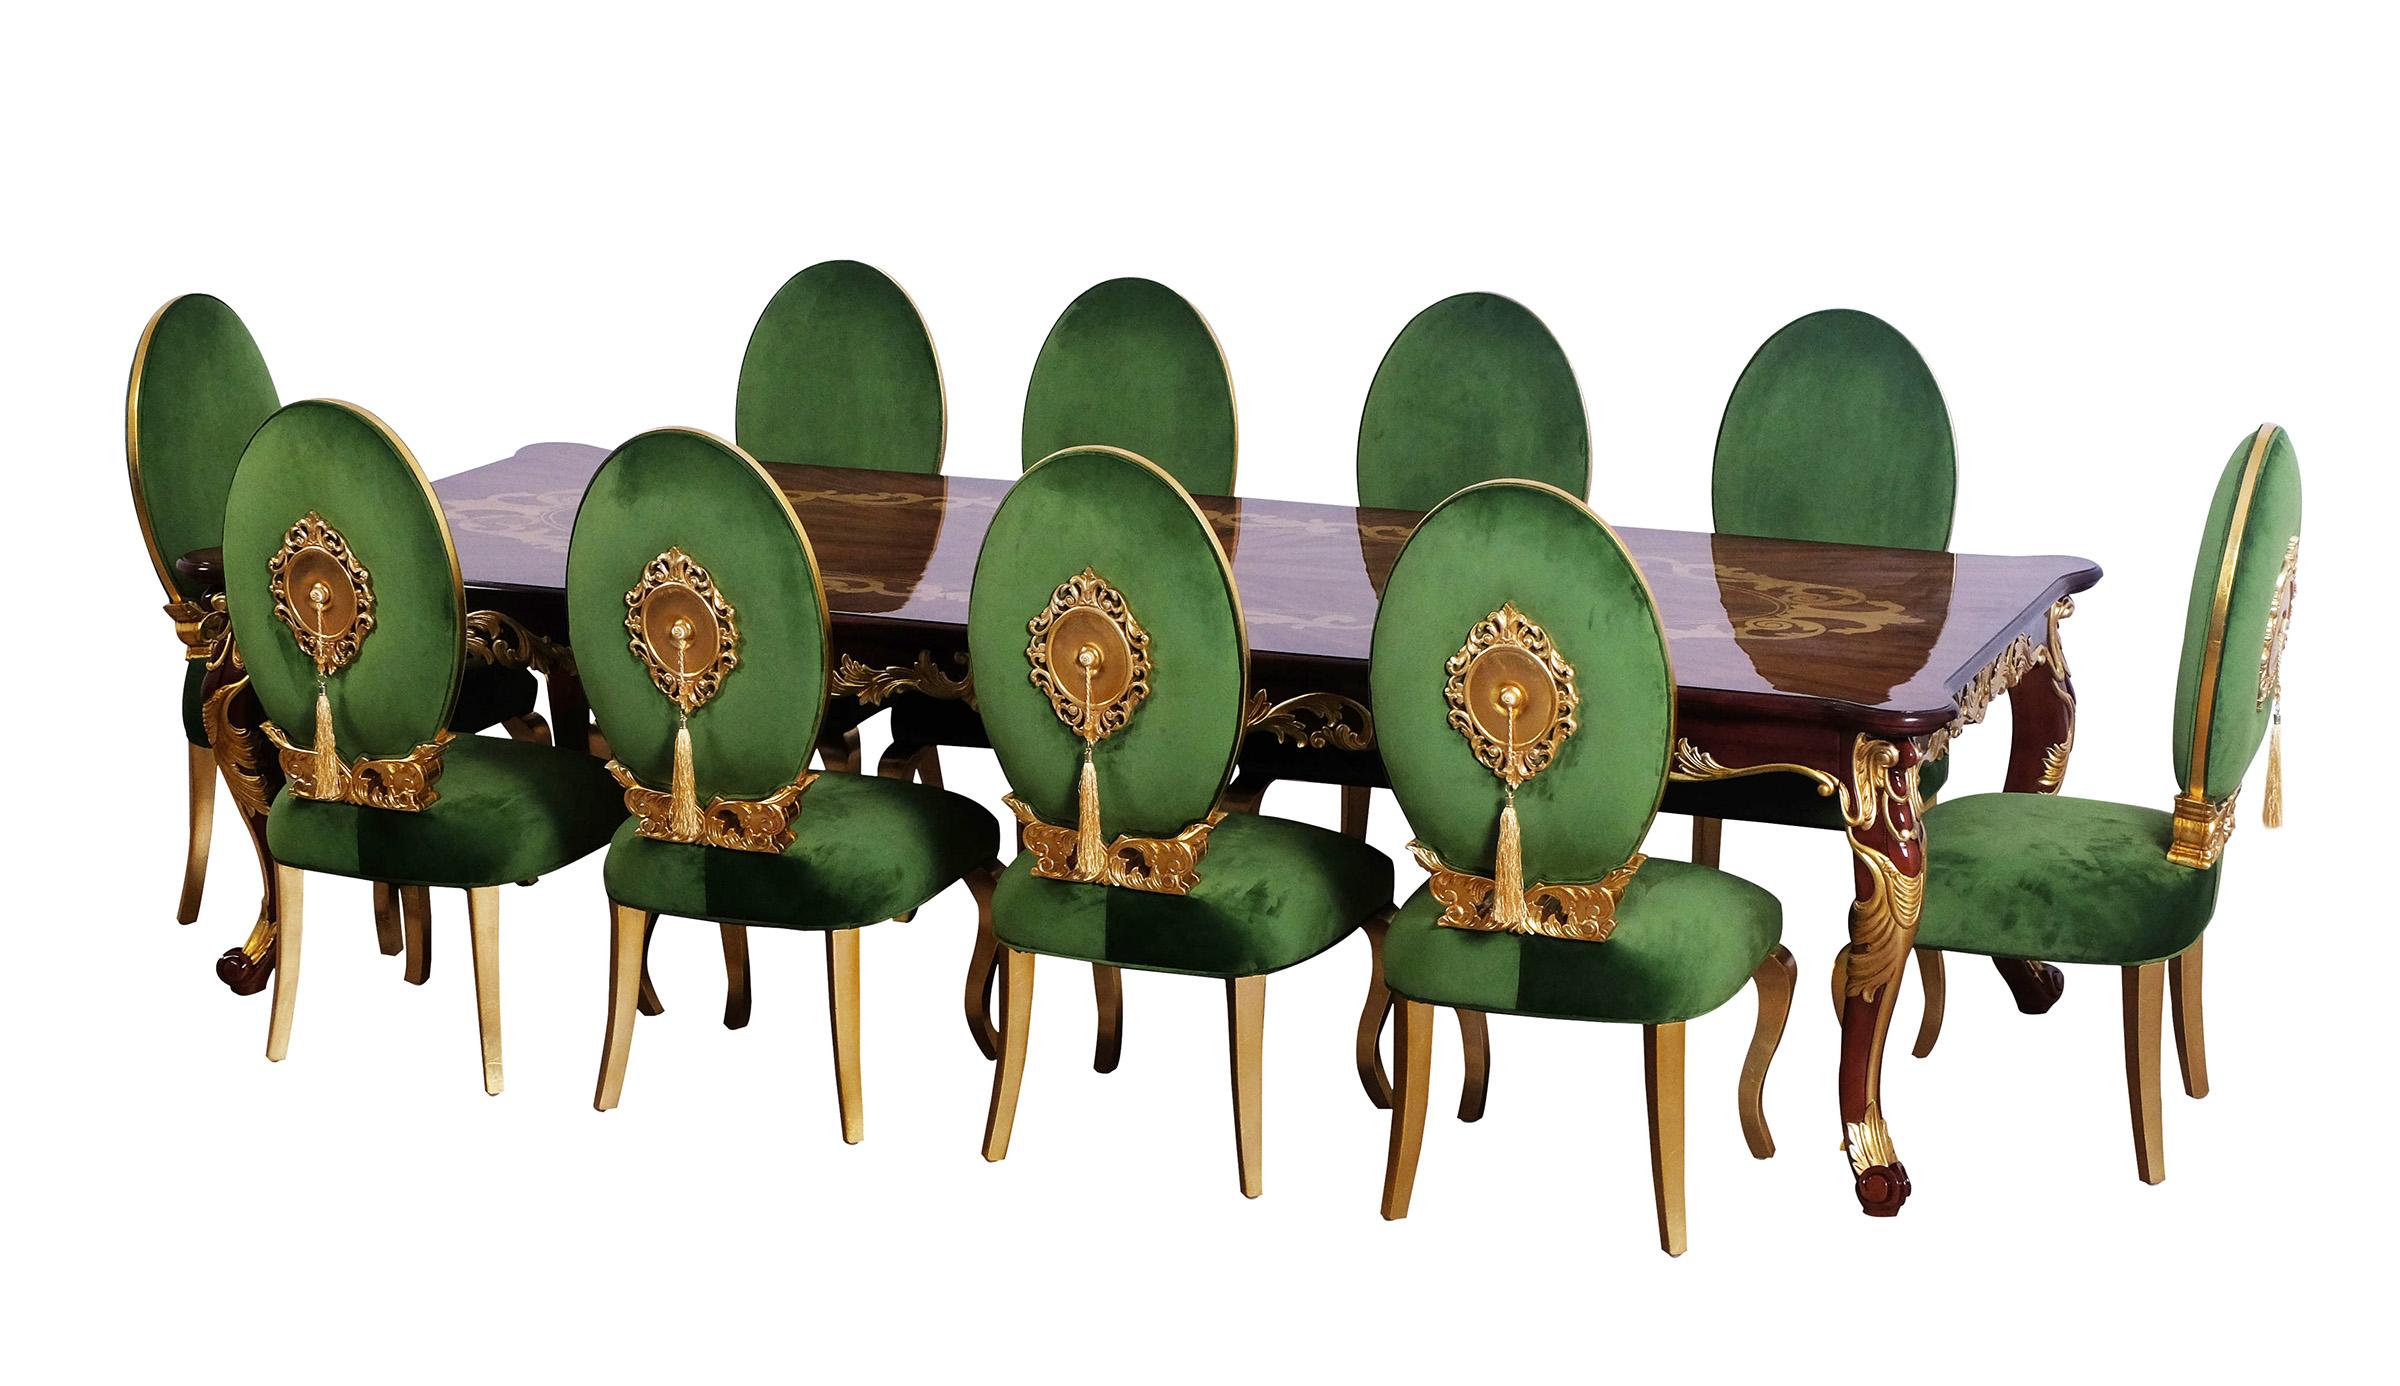 Classic, Traditional Dining Table Set LUXOR 68582-DT-11-EM in Gold, Emerald, Brown Fabric